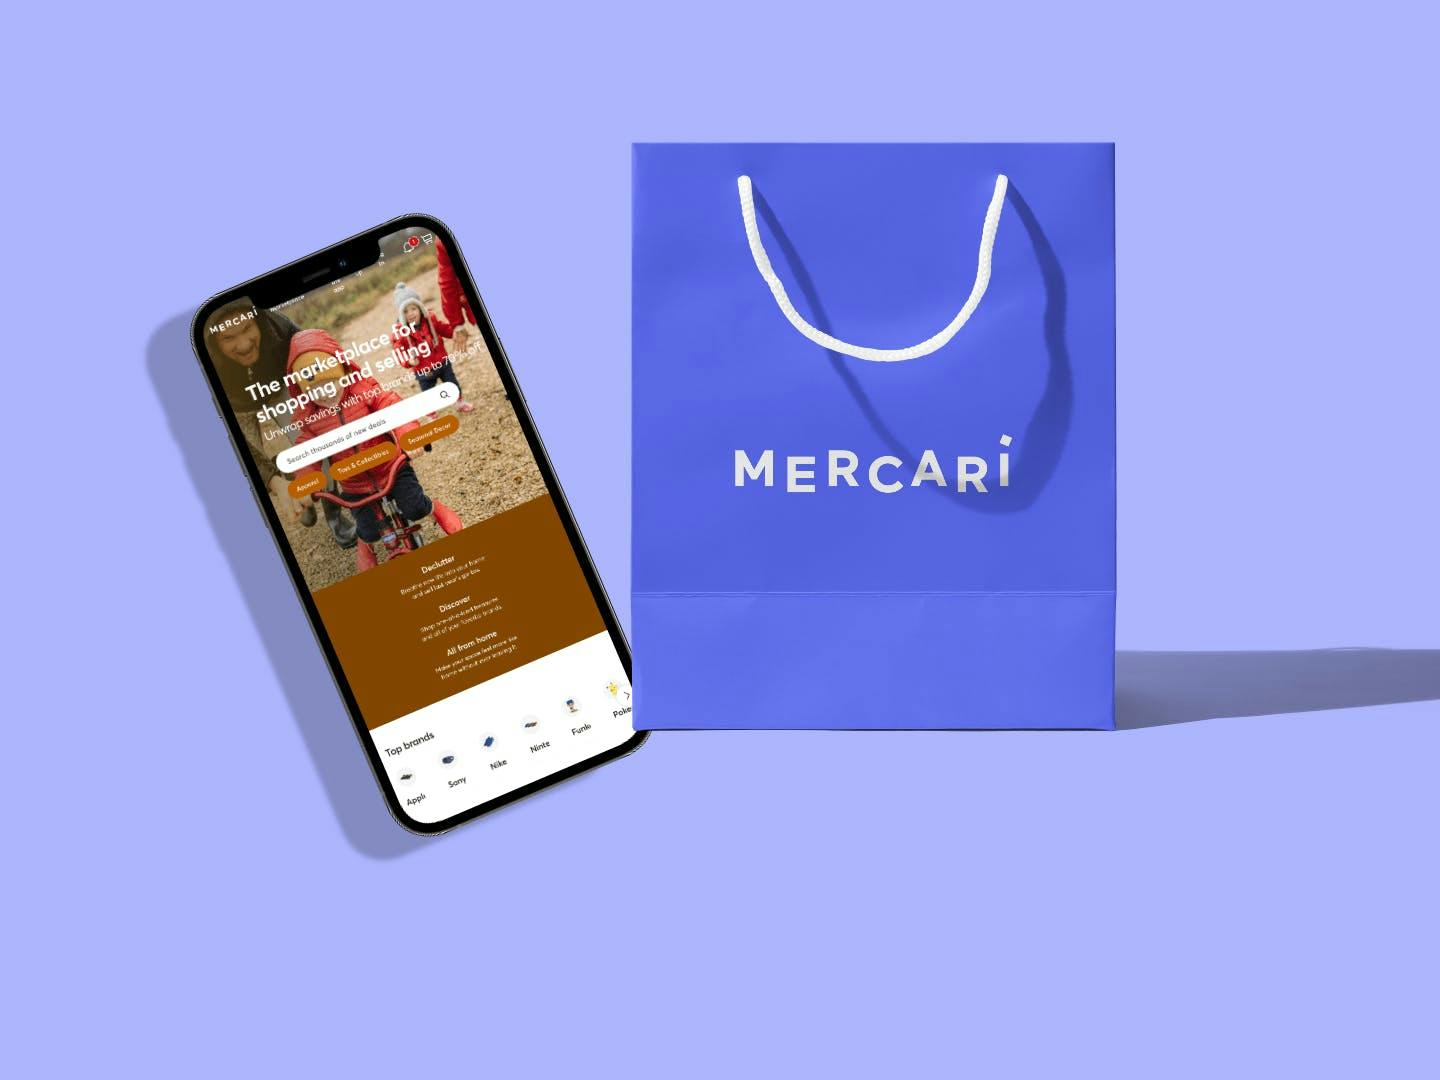 What is Mercari? How can I use it?